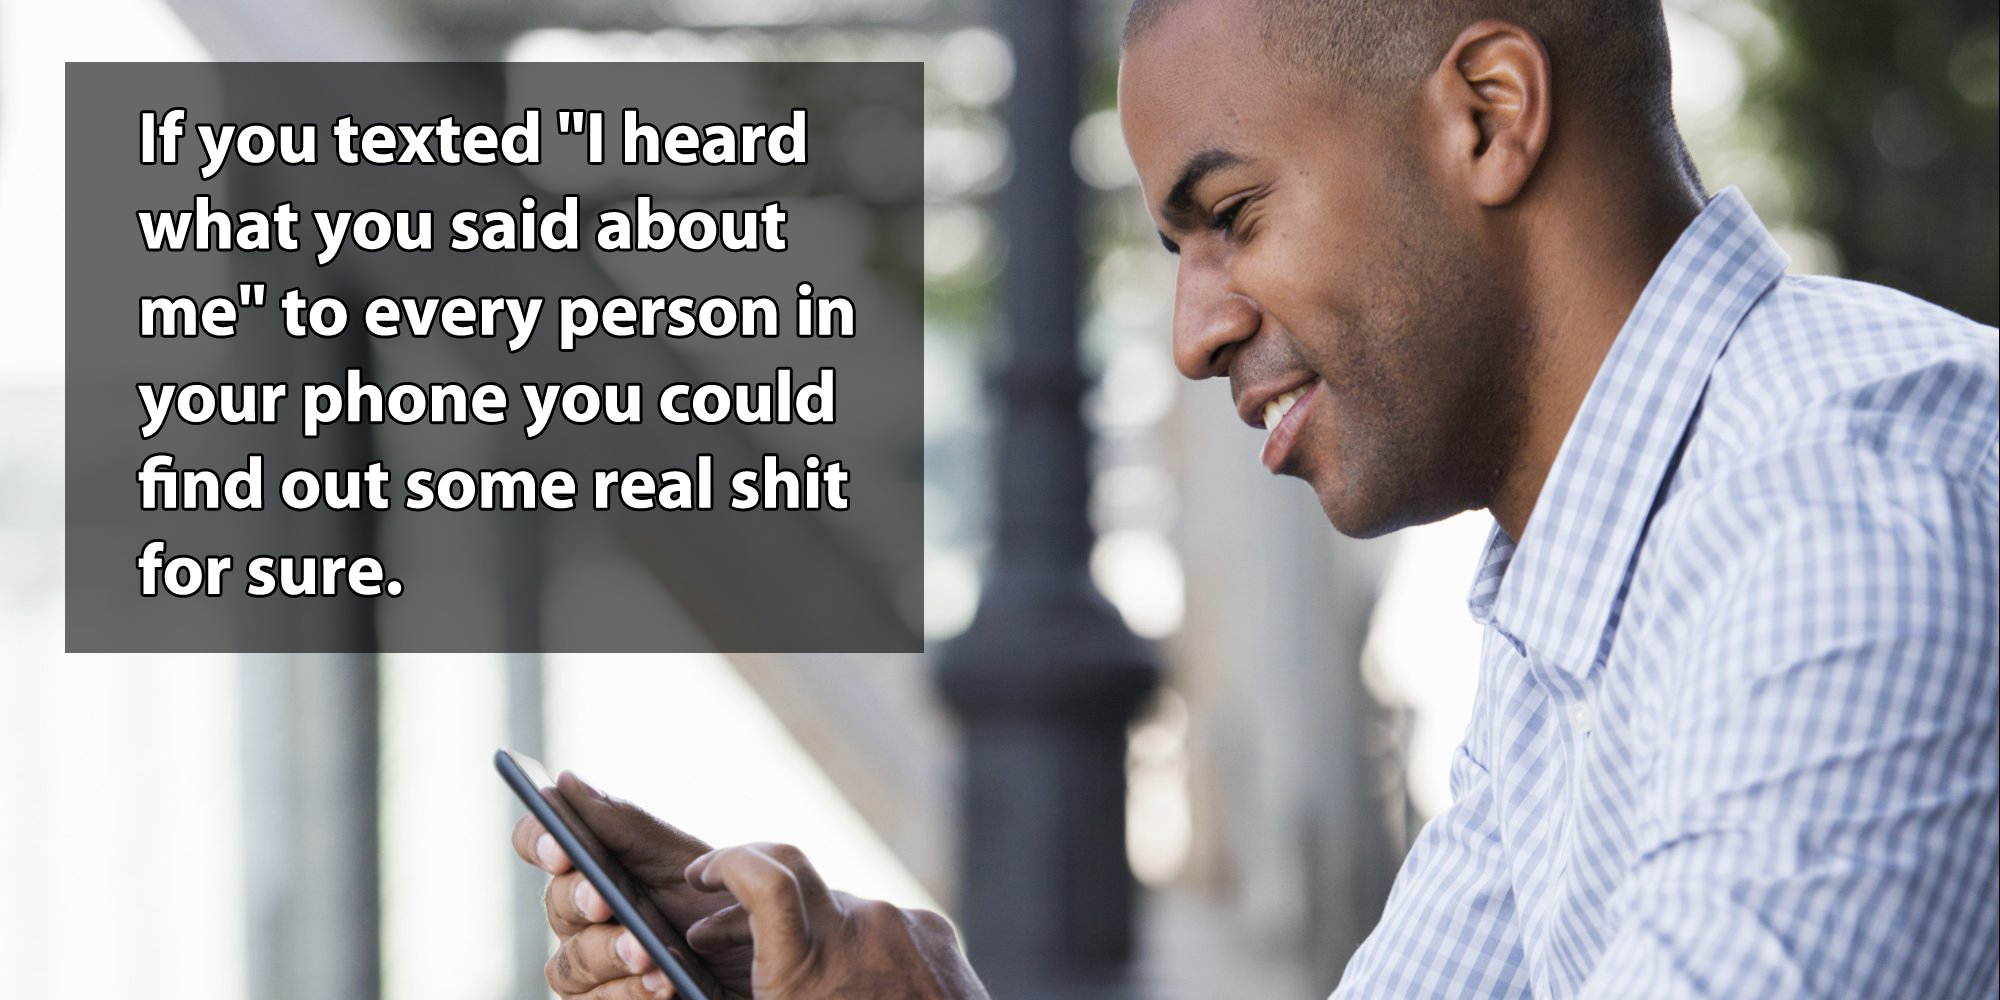 black man with phone - If you texted "I heard what you said about me" to every person in your phone you could find out some real shit for sure.